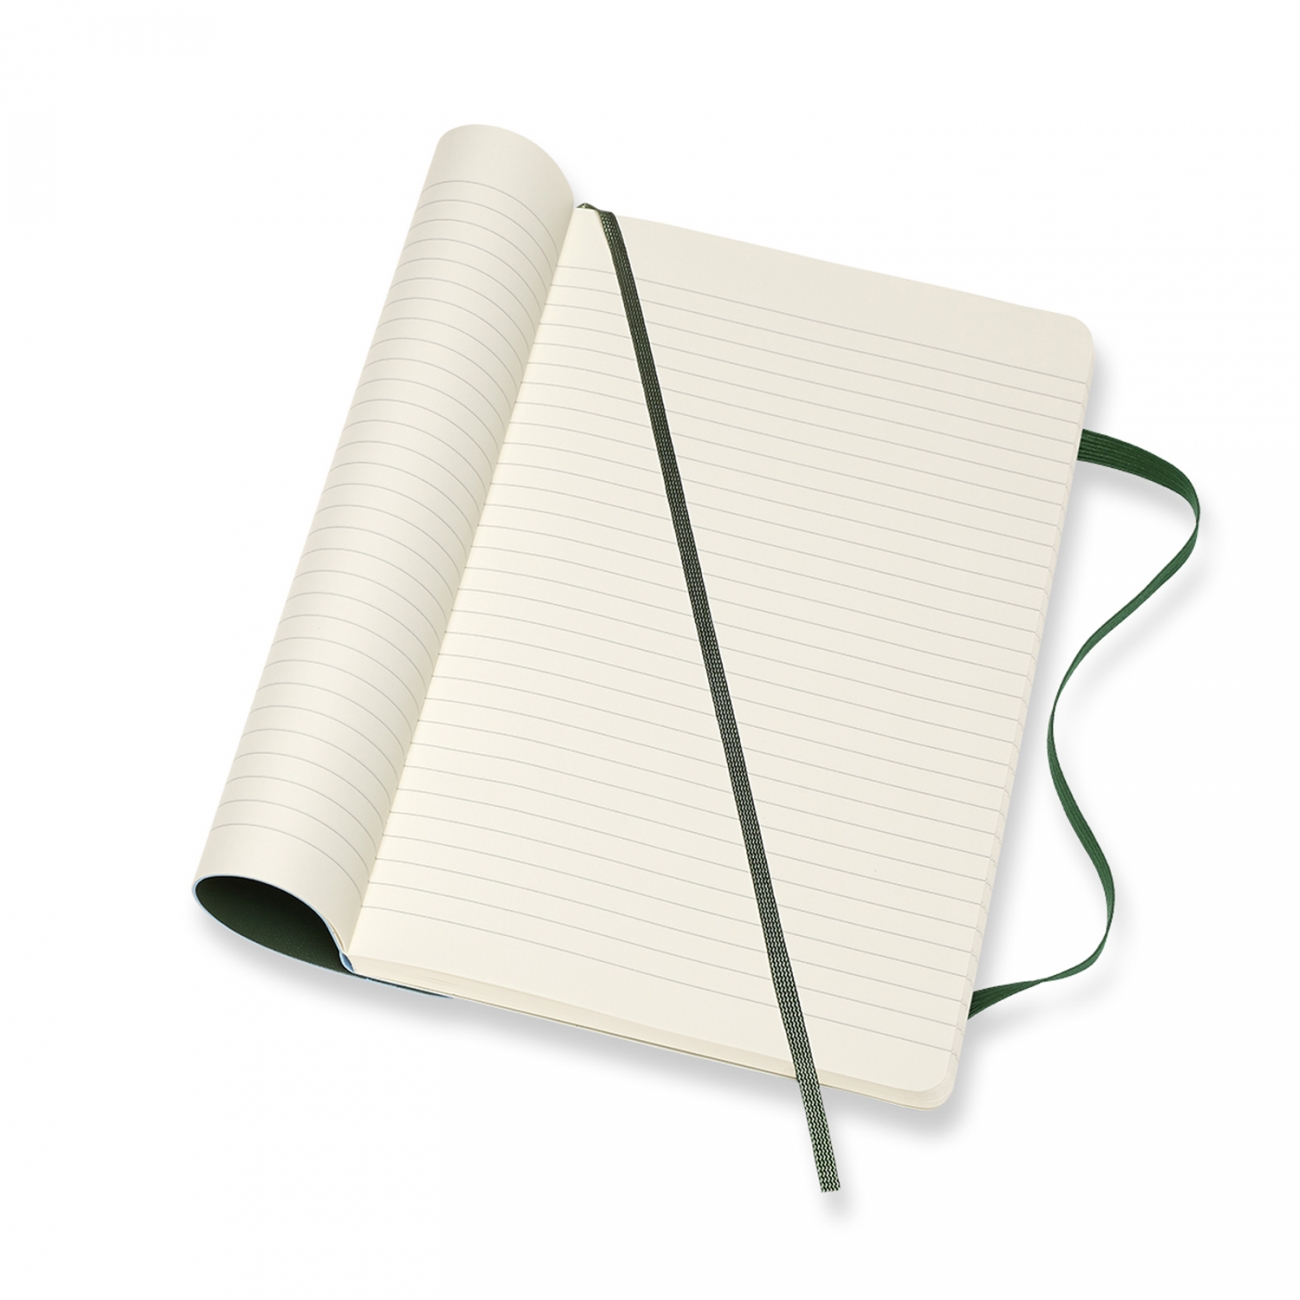 CLASSIC SOFT COVER NOTEBOOK - RULED - LARGE - MYRTLE GREEN